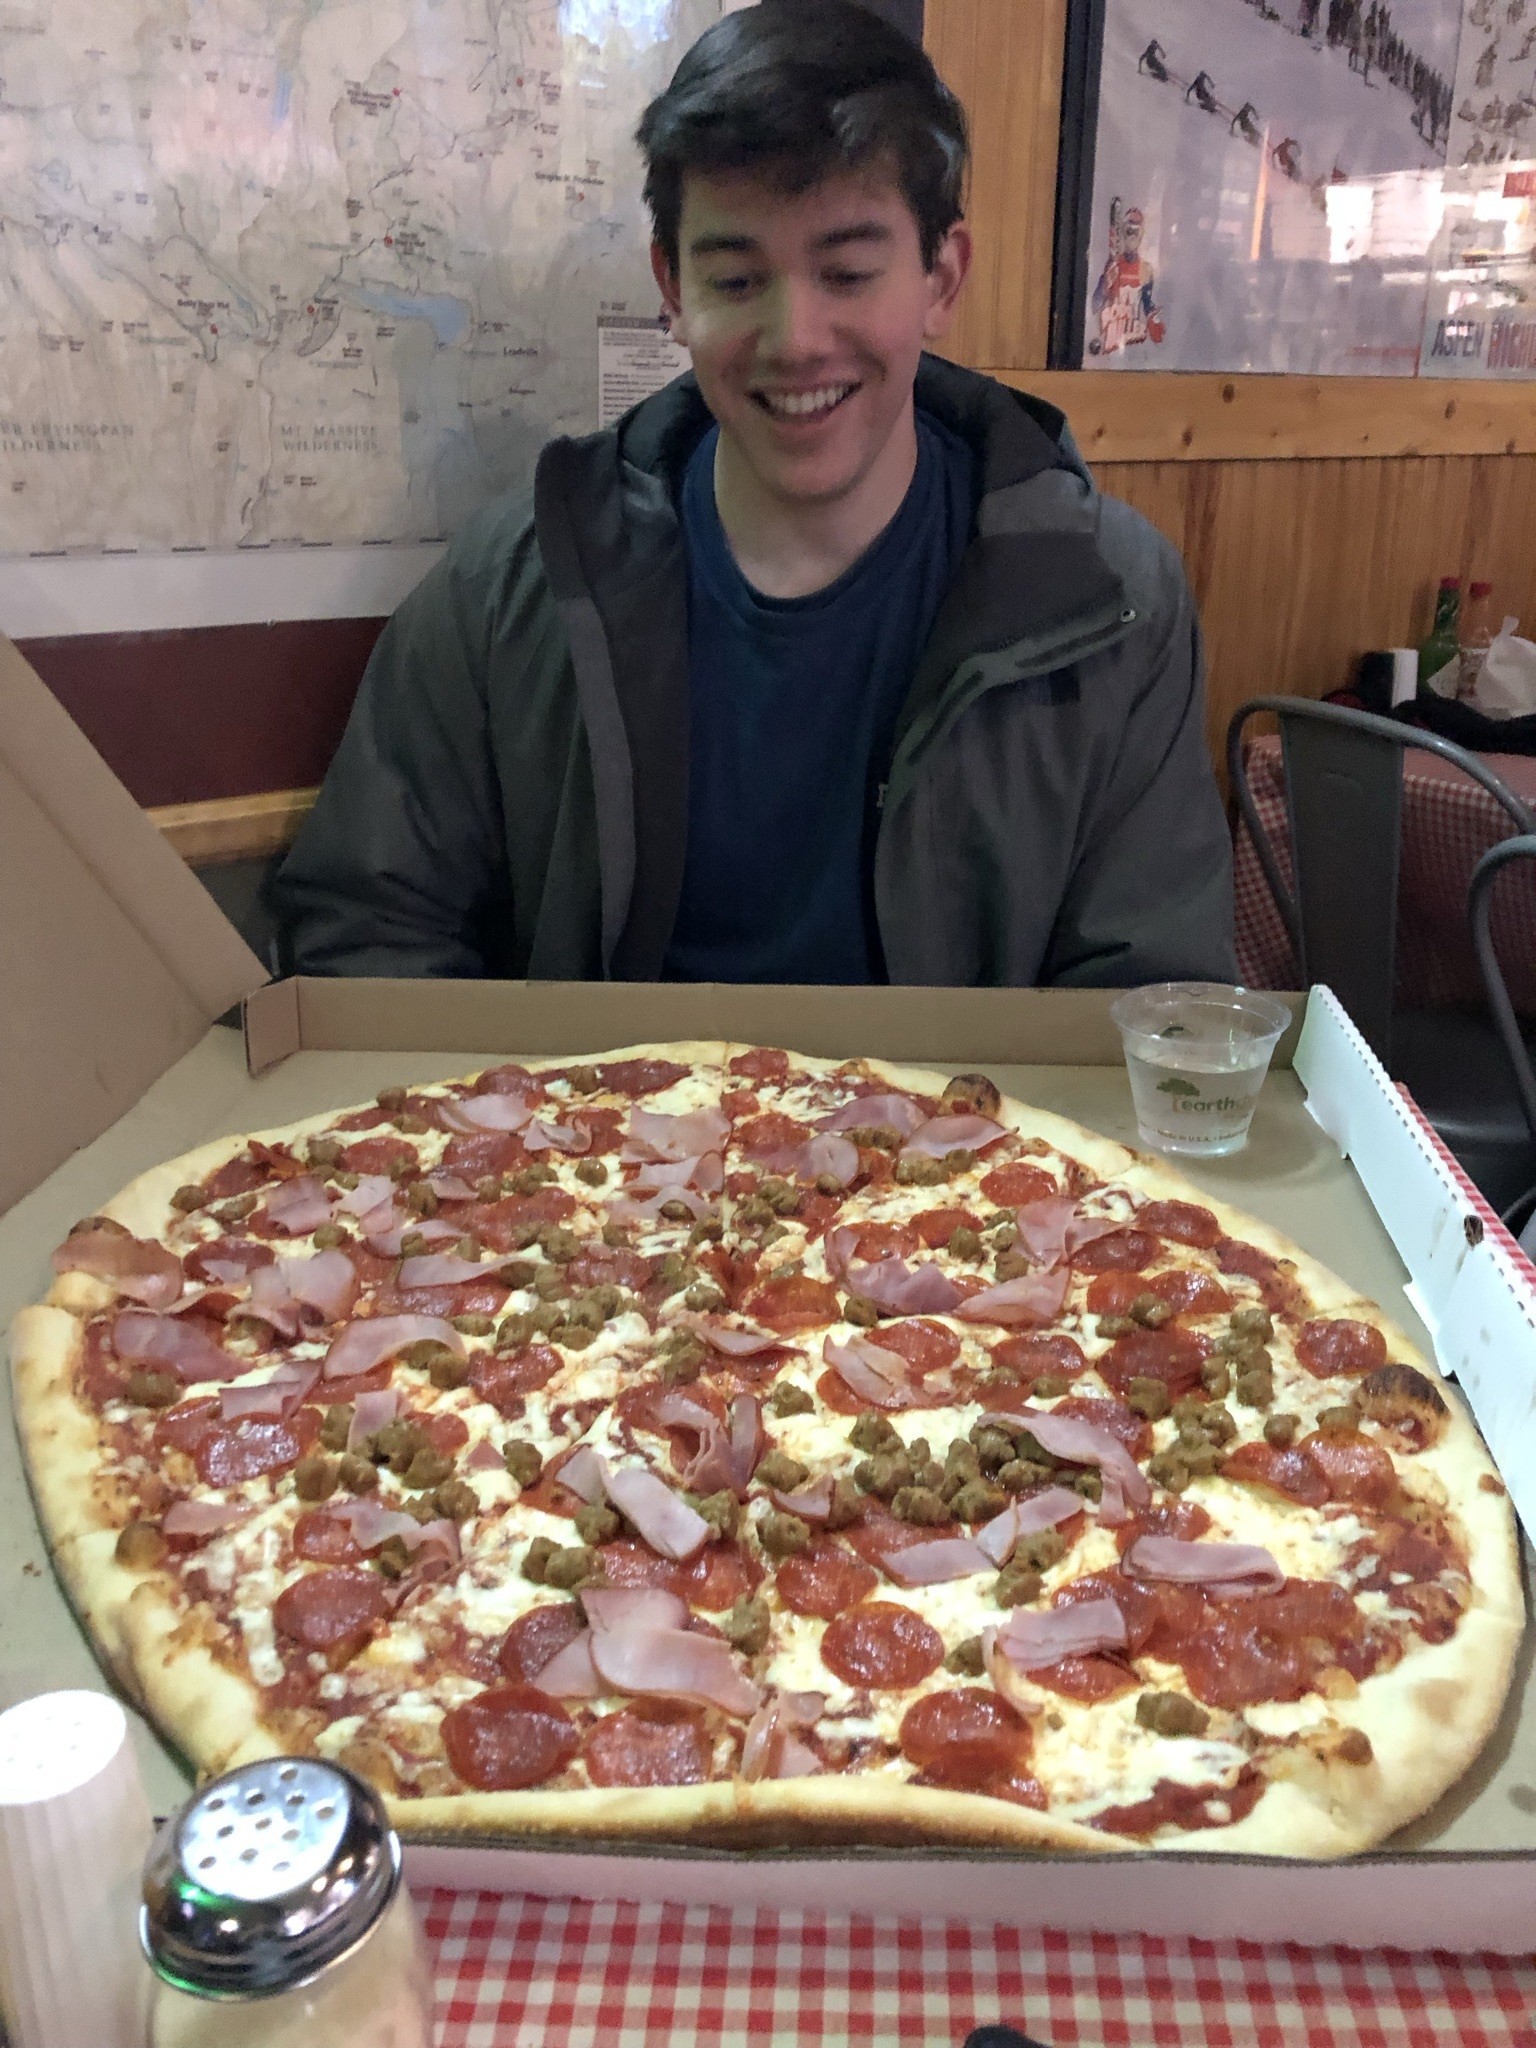 Candid Aidan with a large pizza